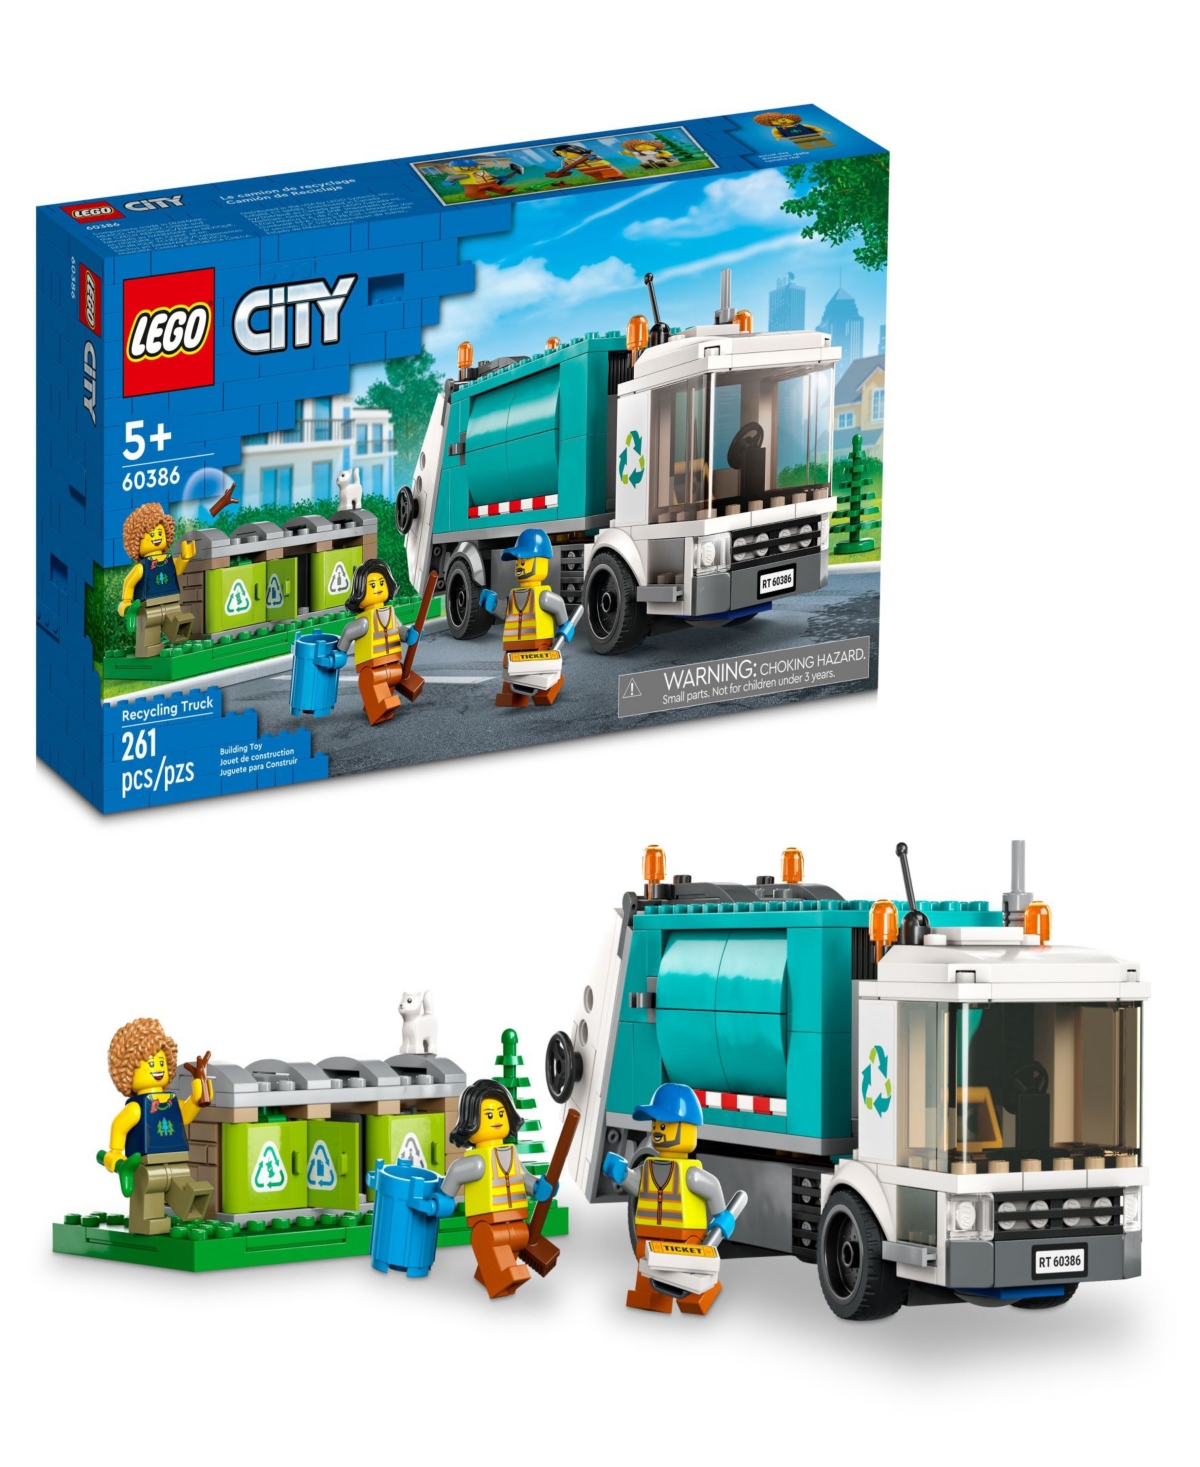 Lego City Great Vehicles Recycling Truck 60386 Toy Building Set With 3 Minifigures In Multicolor